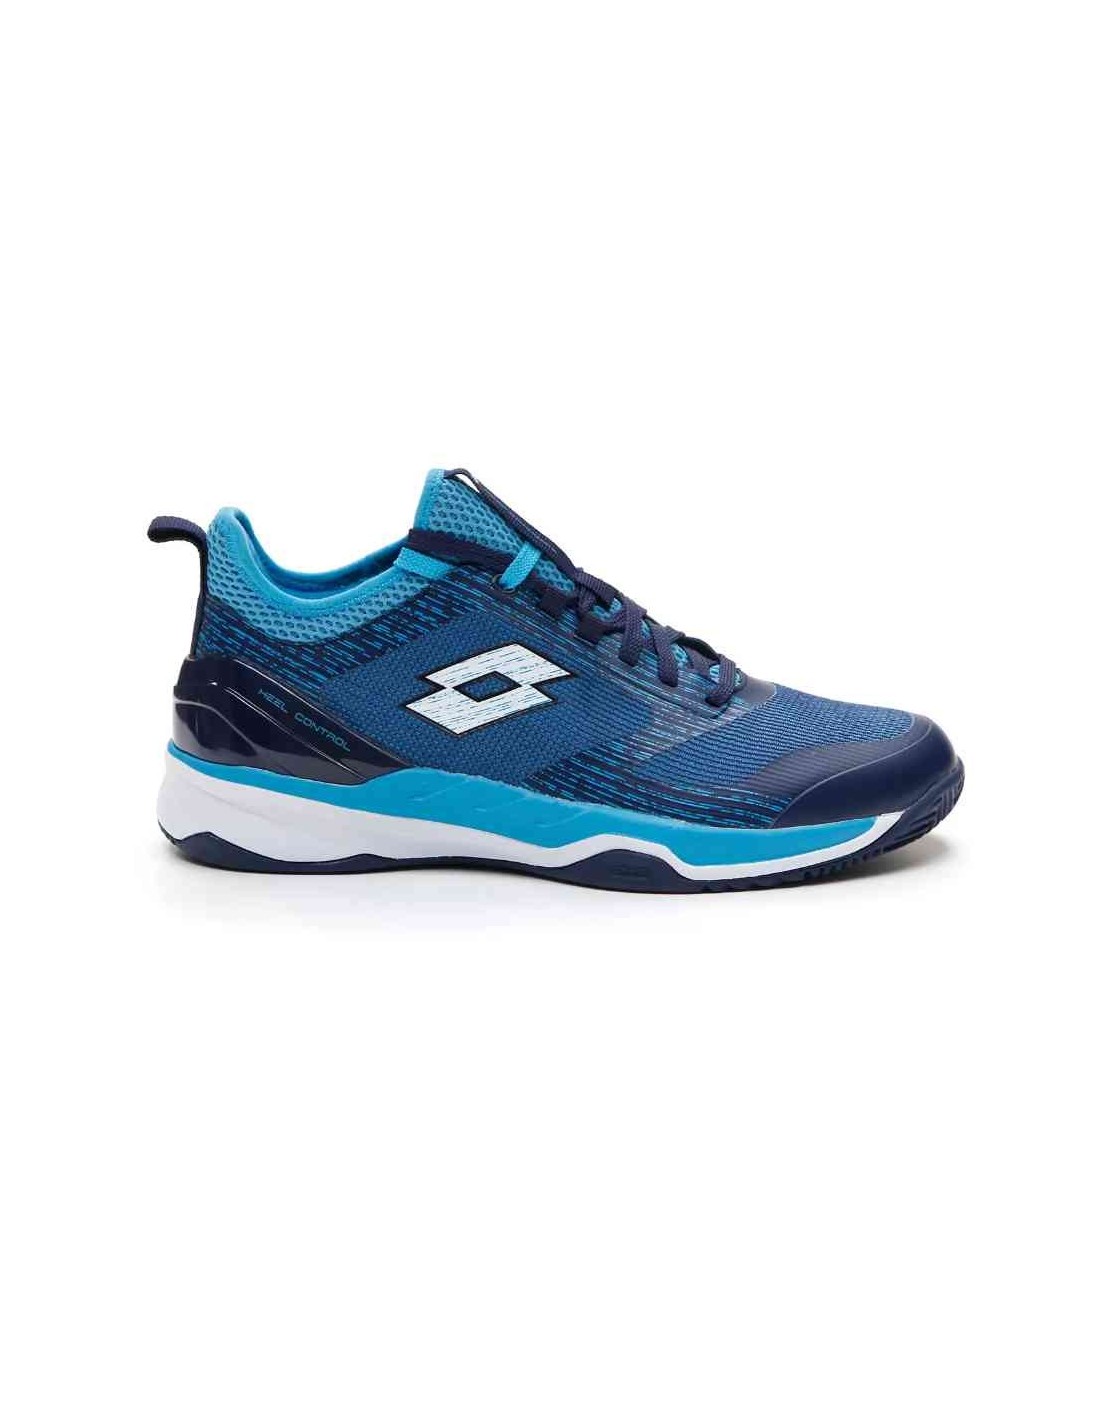 LOTTO MIRAGE 200 CLY NAVY TENNIS SHOE | ONLYTENIS